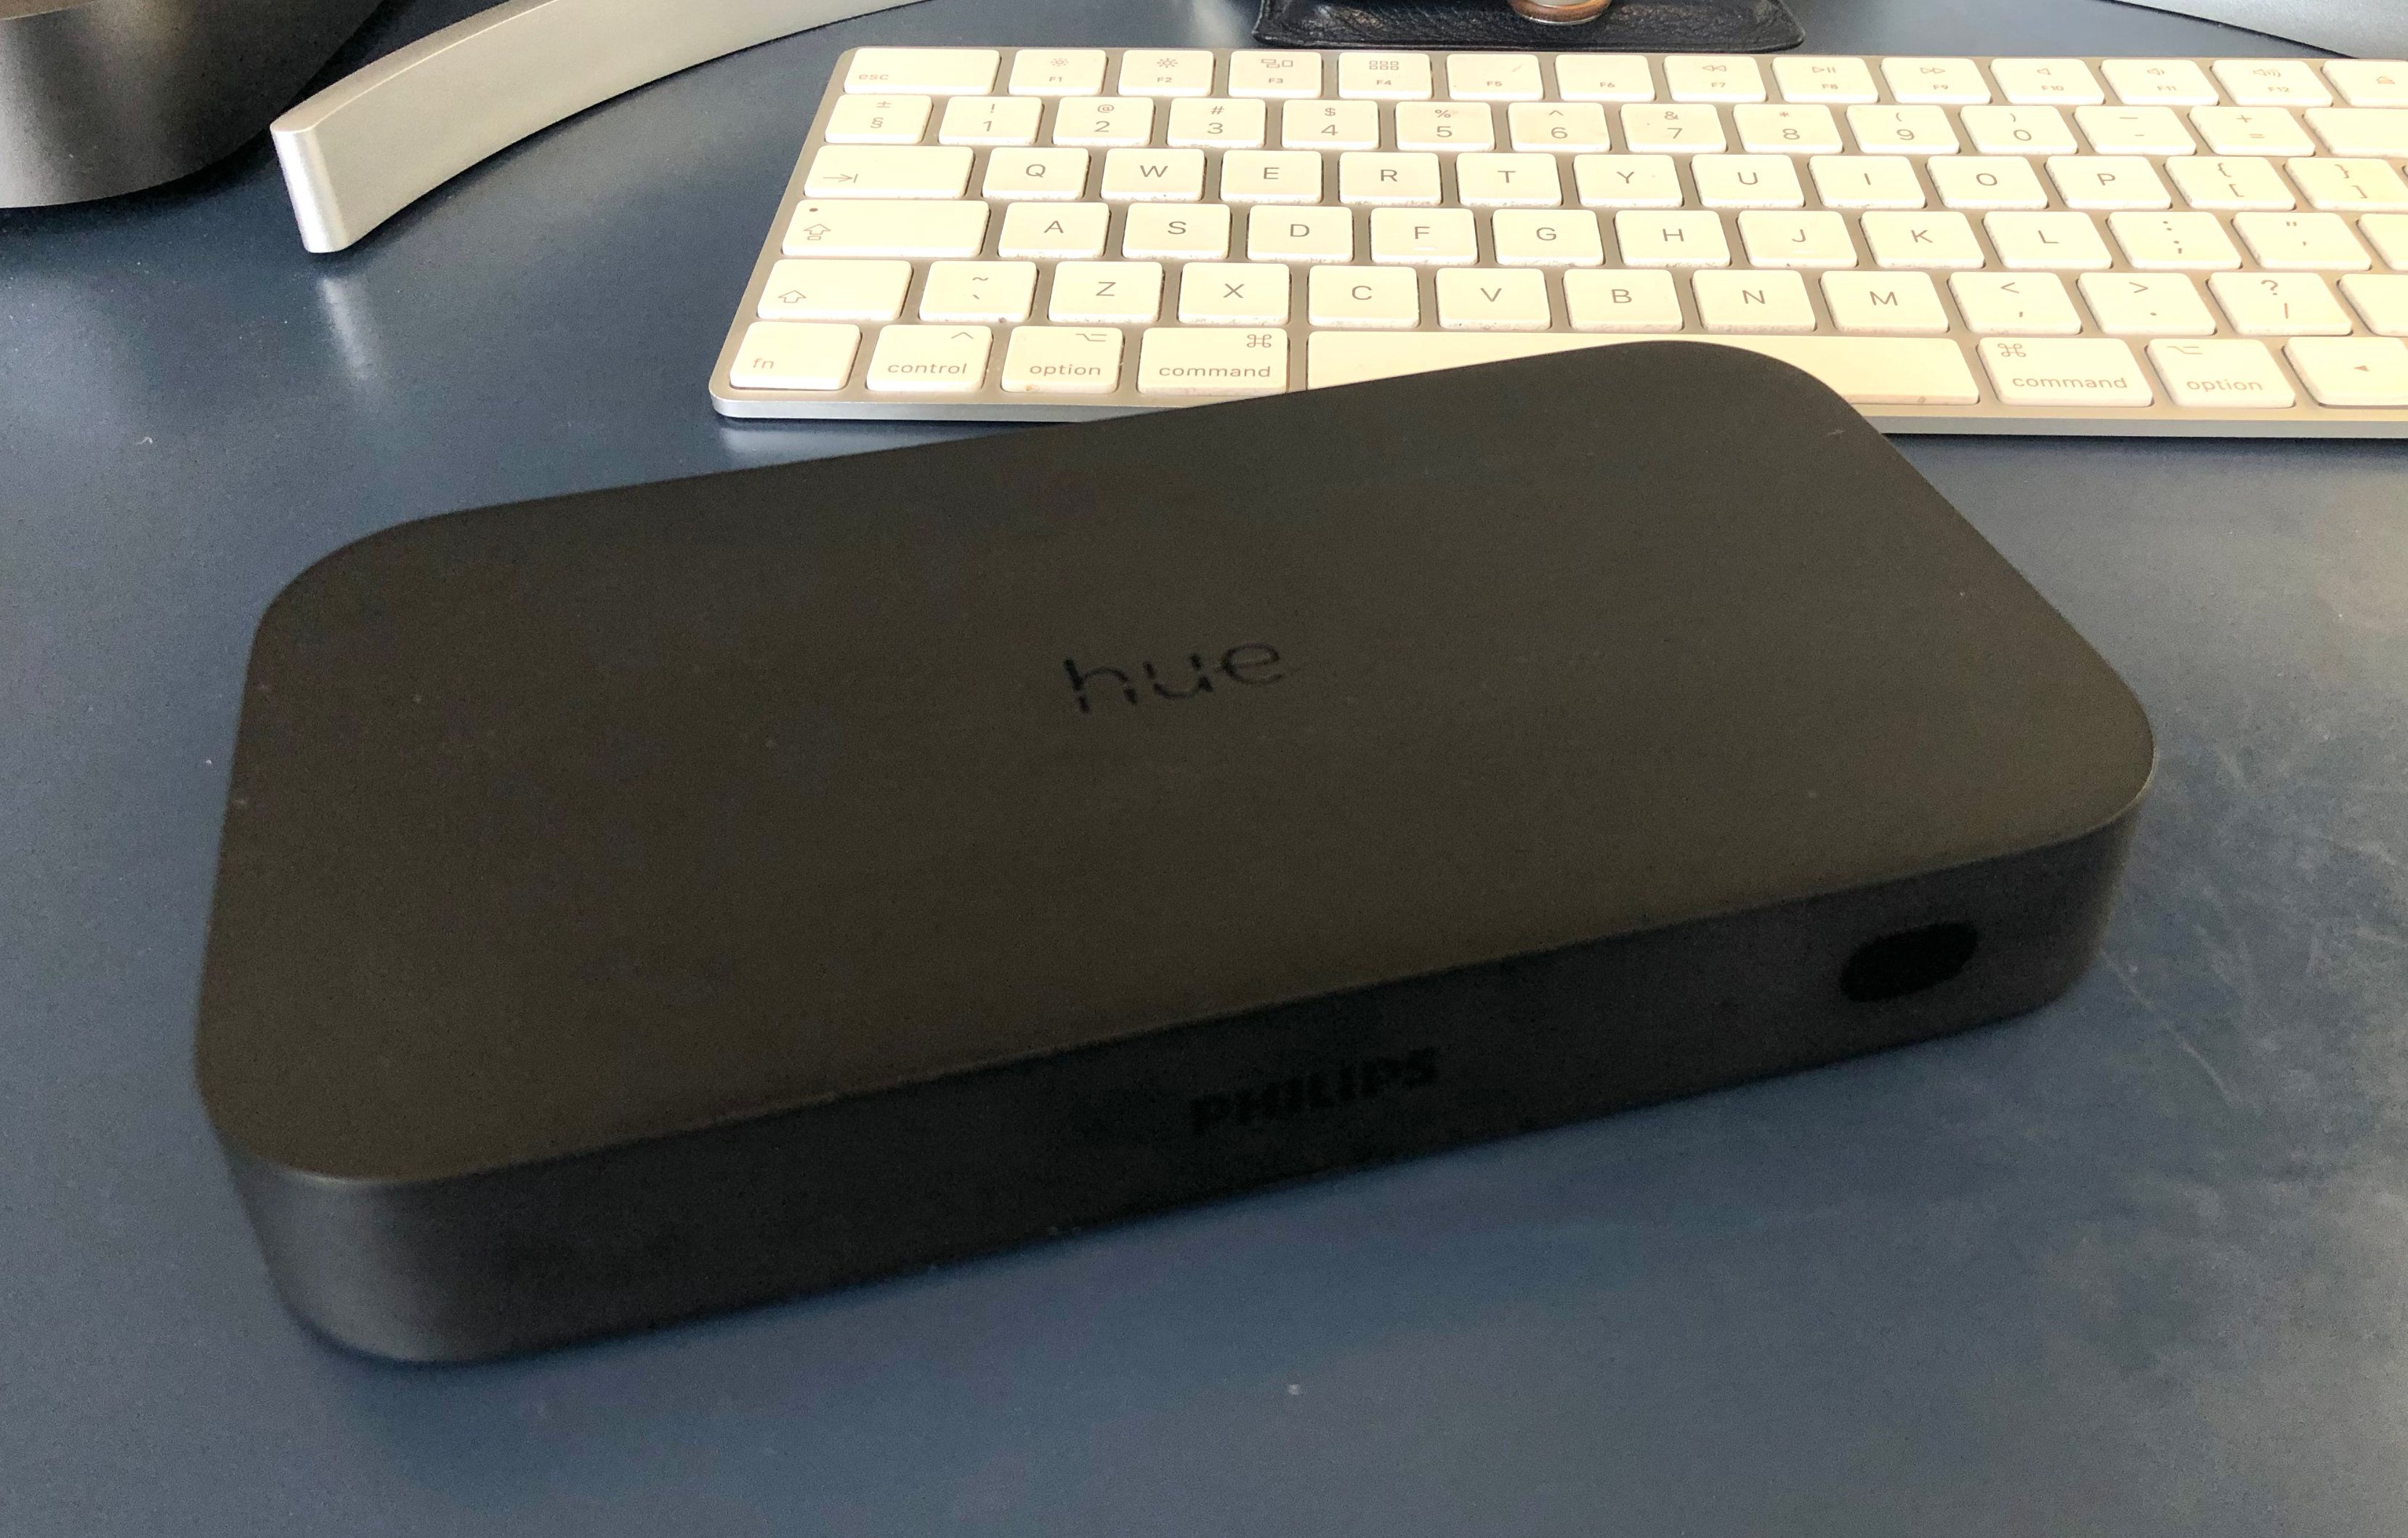 How to Set Up Philips Hue HDMI Sync Box